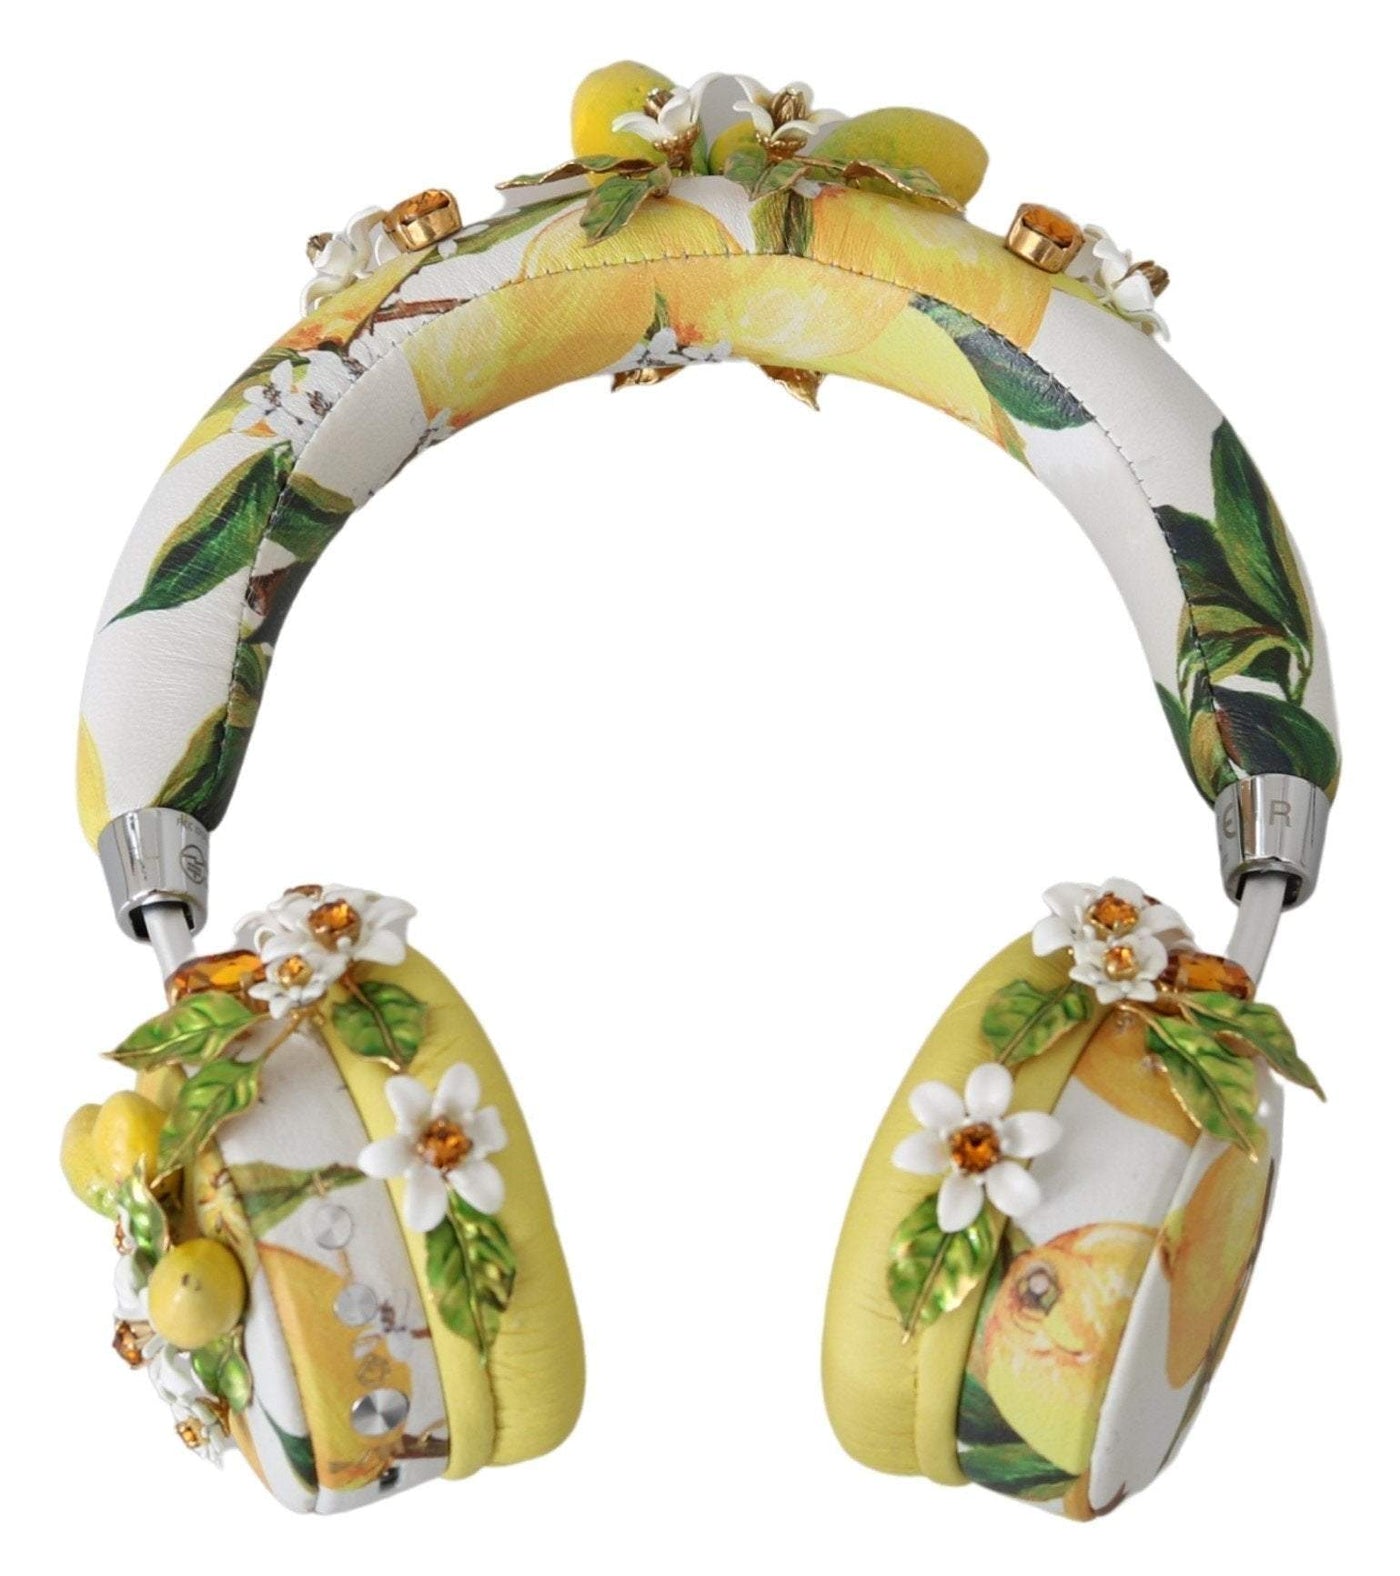 Dolce & Gabbana  Yellow Lemon Crystal Floral Headset Headphones #women, Accessories - New Arrivals, Brand_Dolce & Gabbana, Catch, Dolce & Gabbana, feed-agegroup-adult, feed-color-yellow, feed-gender-female, feed-size-OS, Gender_Women, Kogan, Other - Women - Accessories, Yellow at SEYMAYKA